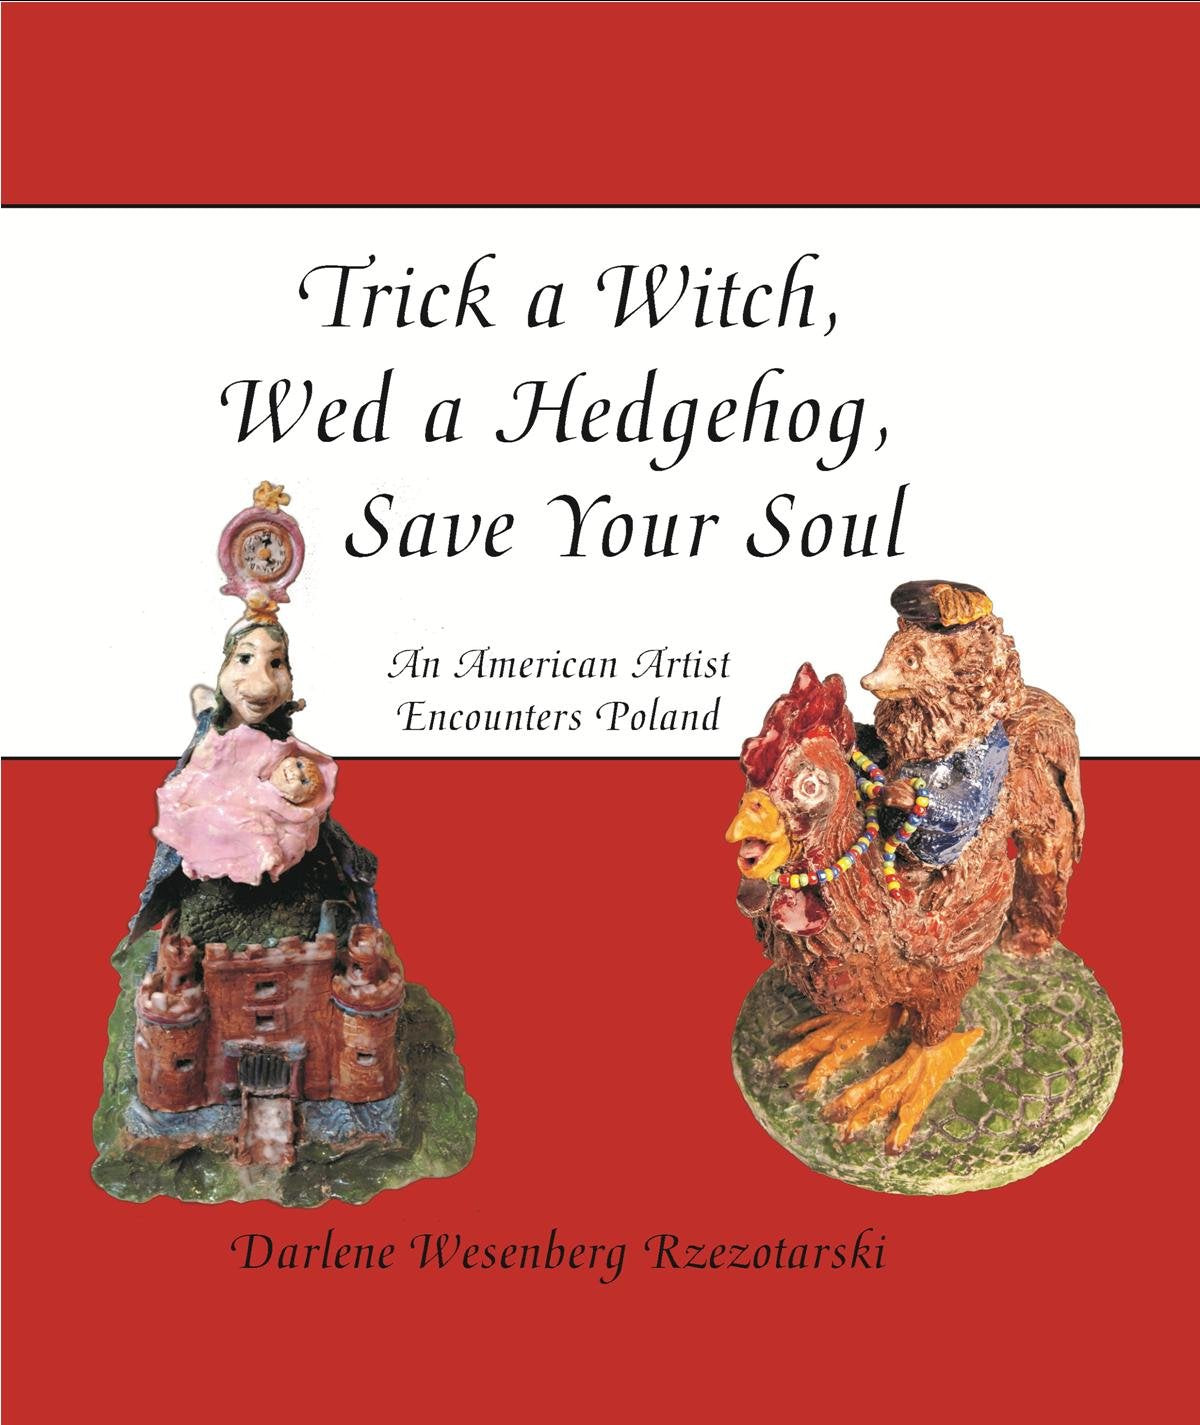 Trick a Witch, Wed a Hedgehog, Save Your Soul: An American Artist Encounters Poland